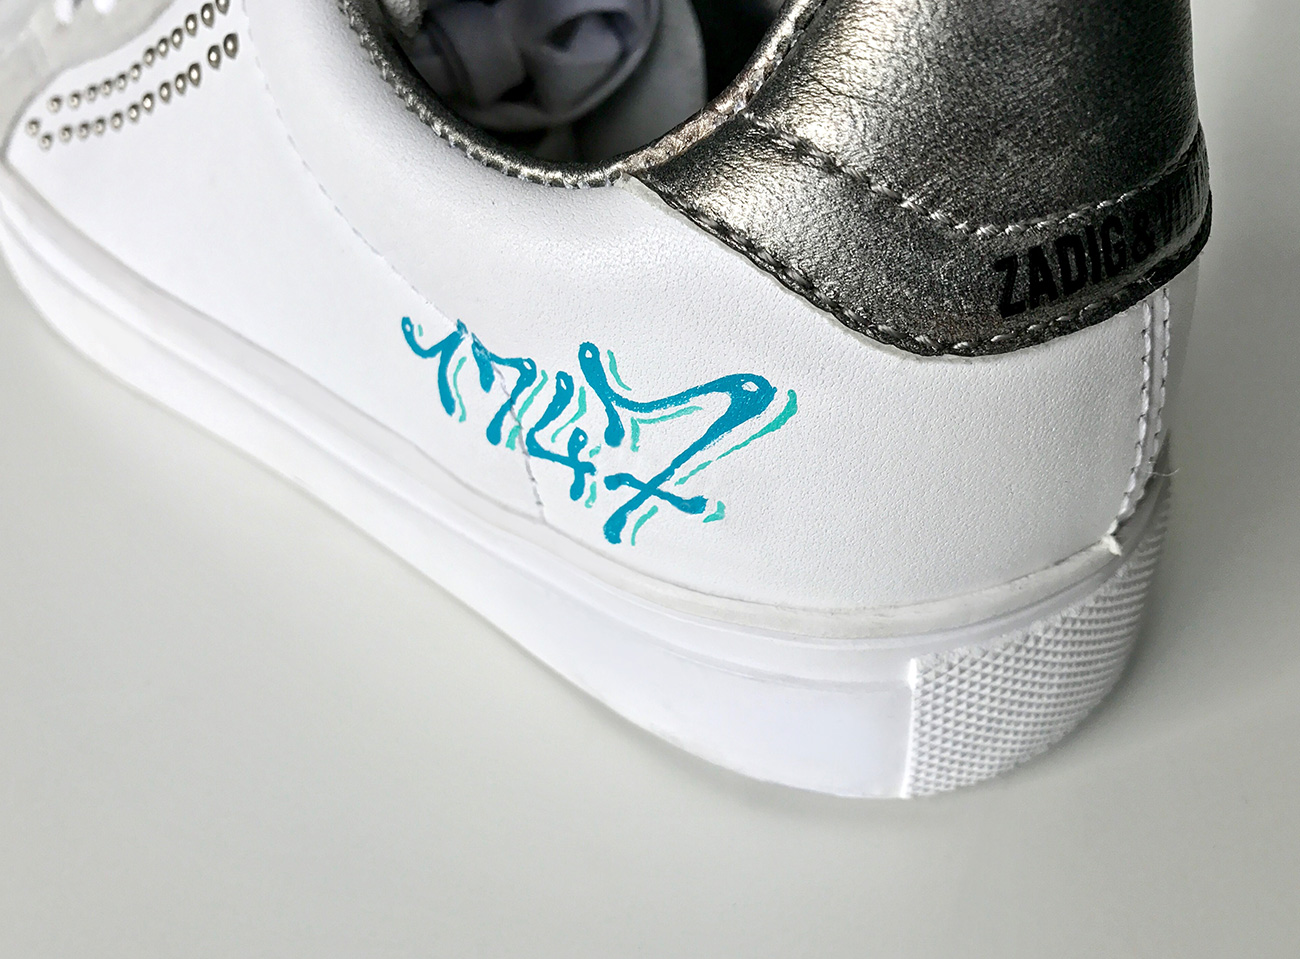 Details of the hand-painted lettering for the Zadig&Voltaire brand